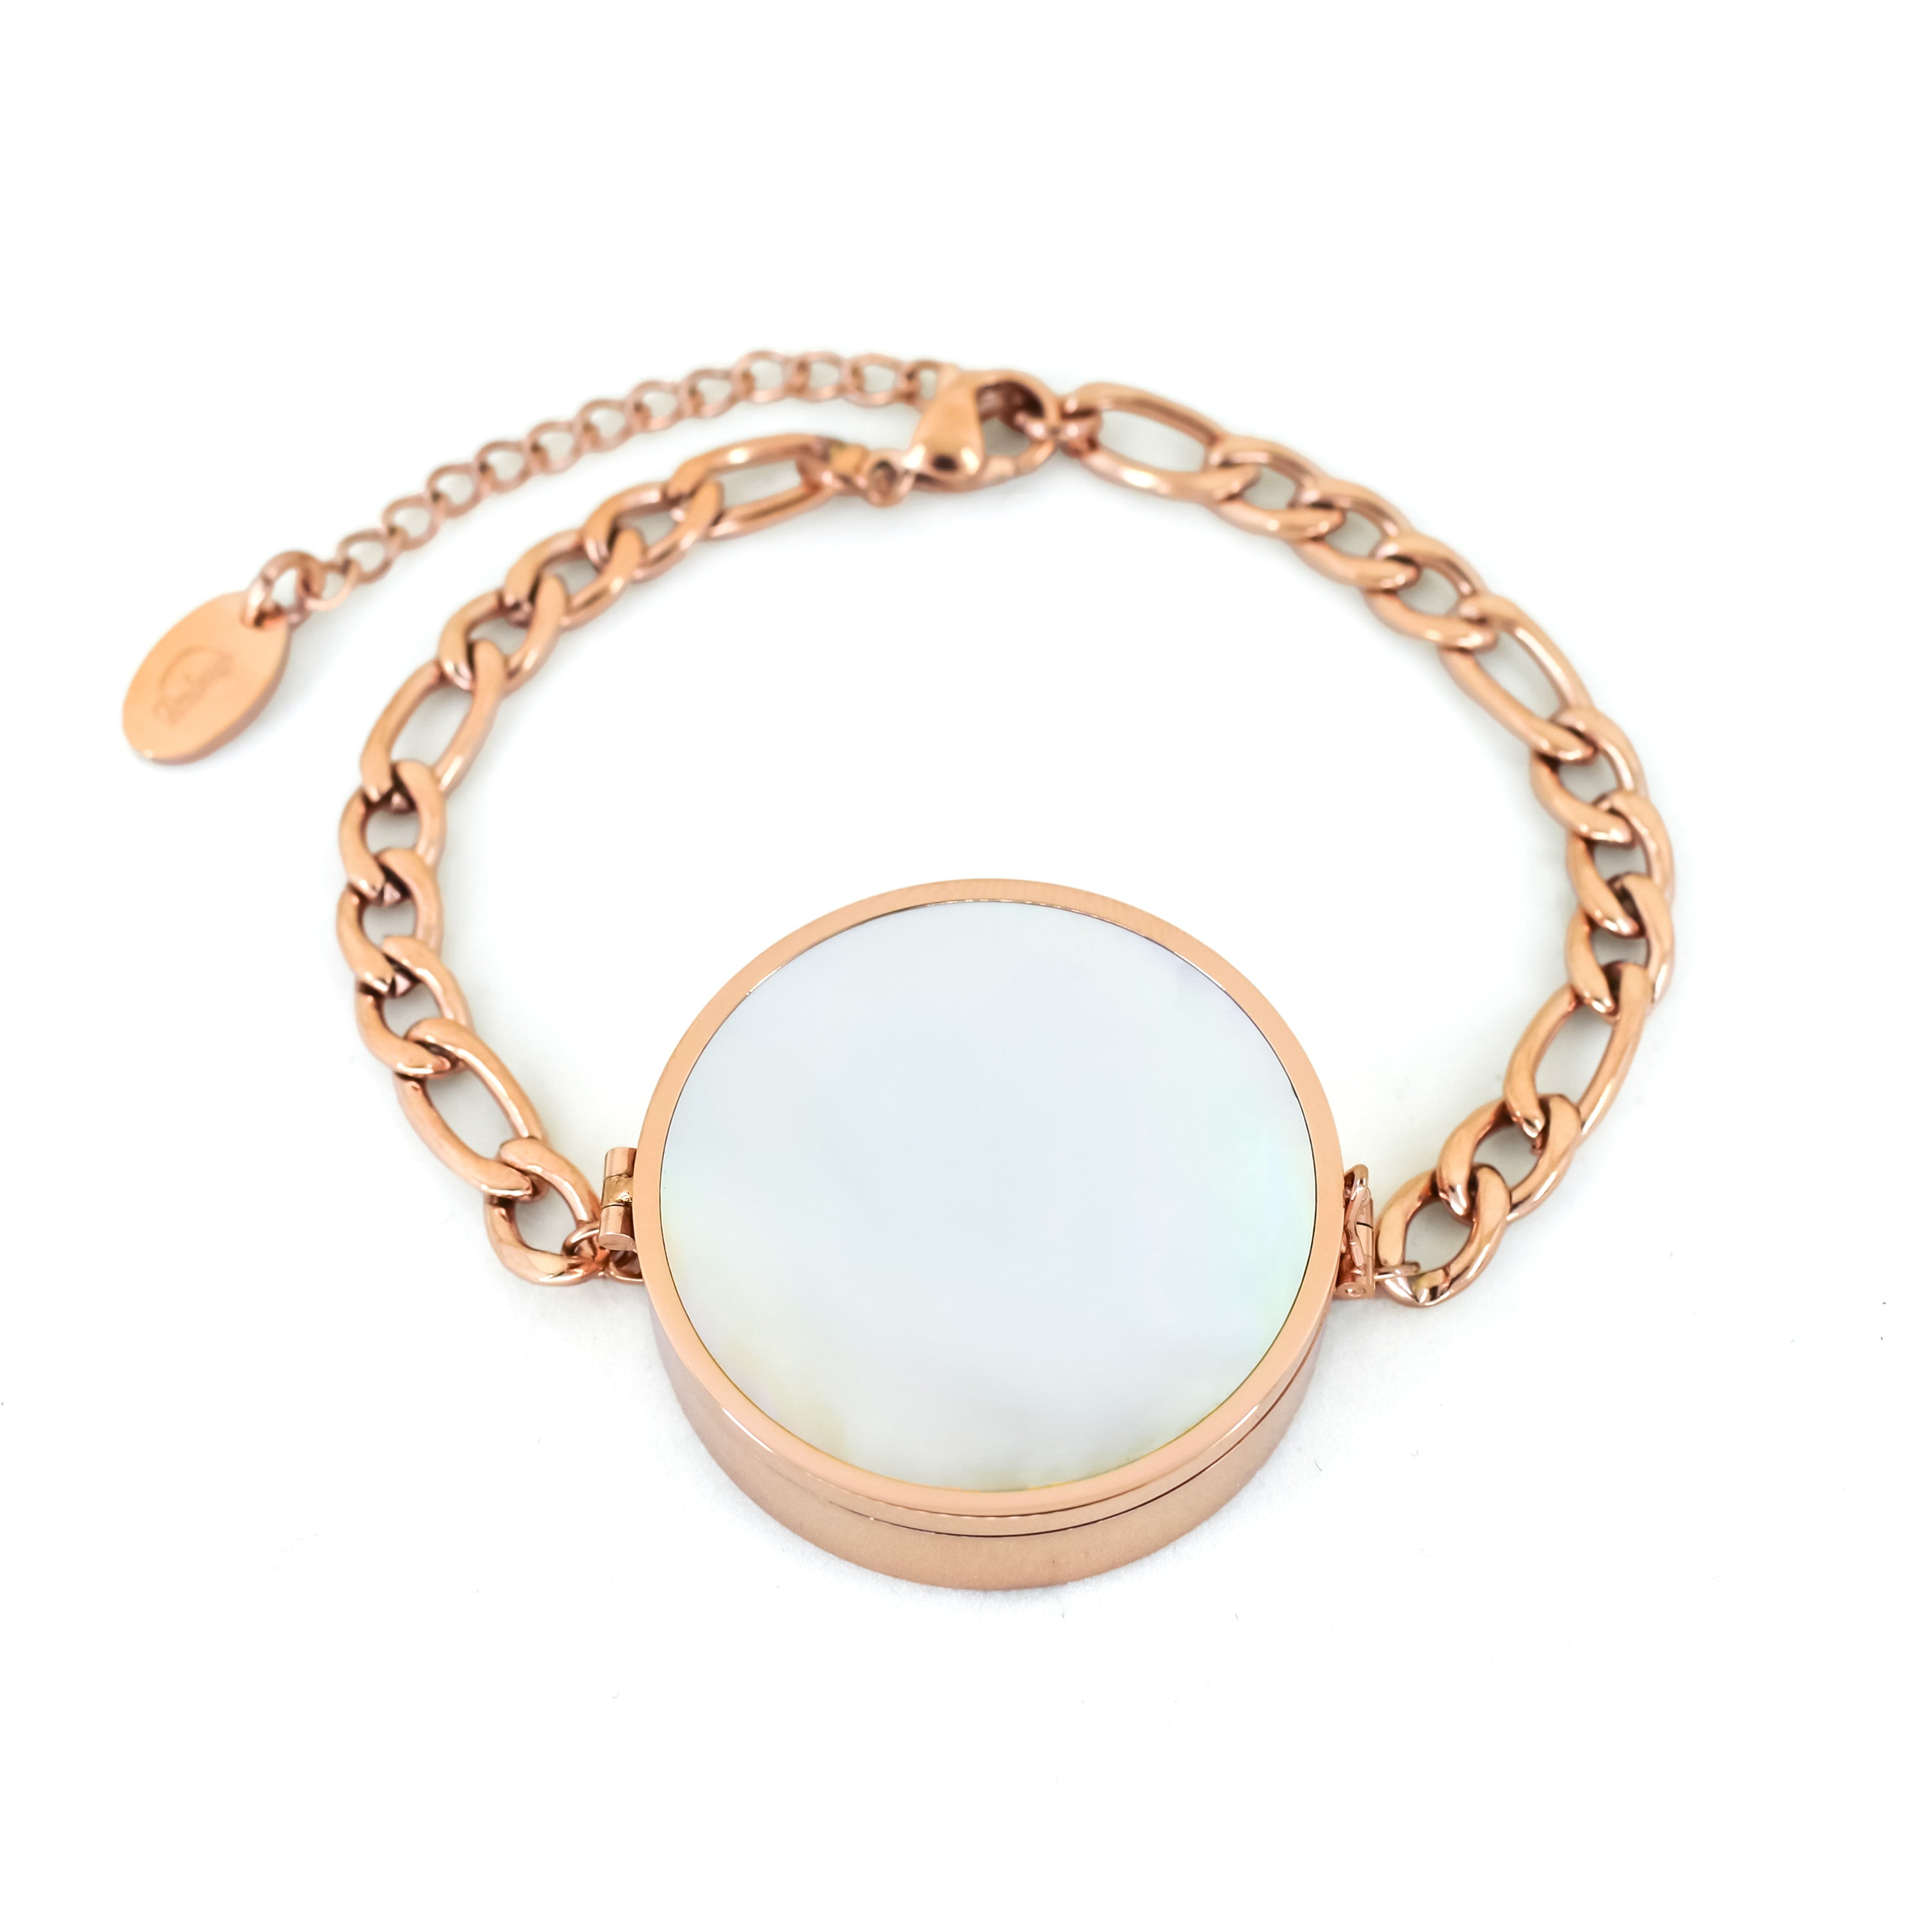 Mother of Pearl Lip Balm Bracelet in Rose Gold - getbalmy